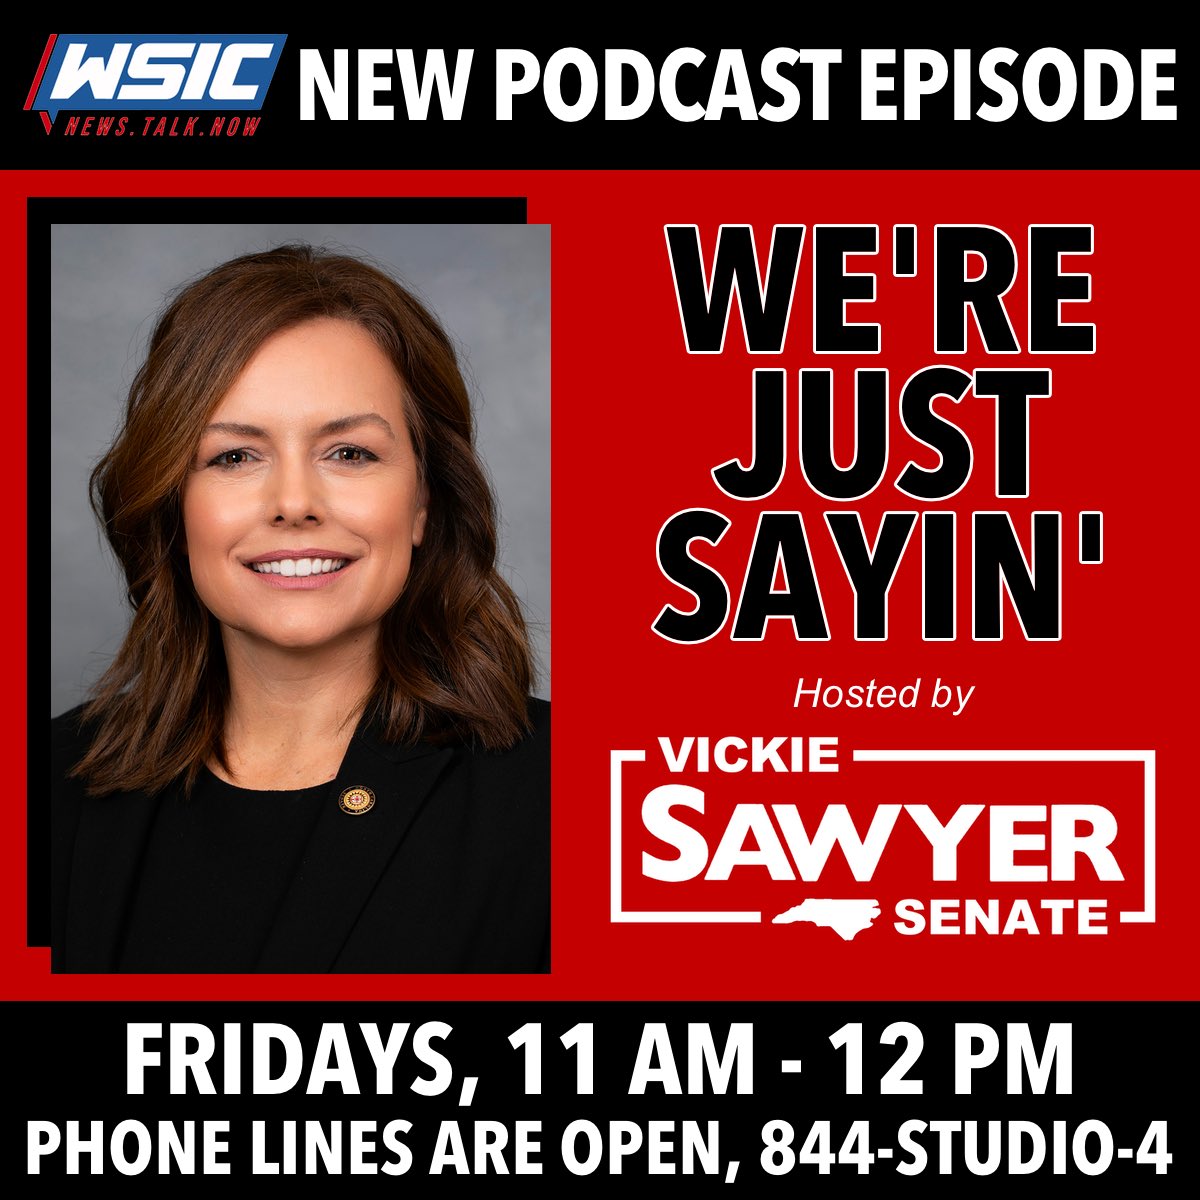 NEW EPISODE 🎙️ This week on We’re Just Sayin’, we sit down with Town of Davidson Mayor Rusty Knox to talk about his family, his experience growing up in the community, the history of the Town of Davidson & how its growing along with the Red Line Commuter Rail project. We also